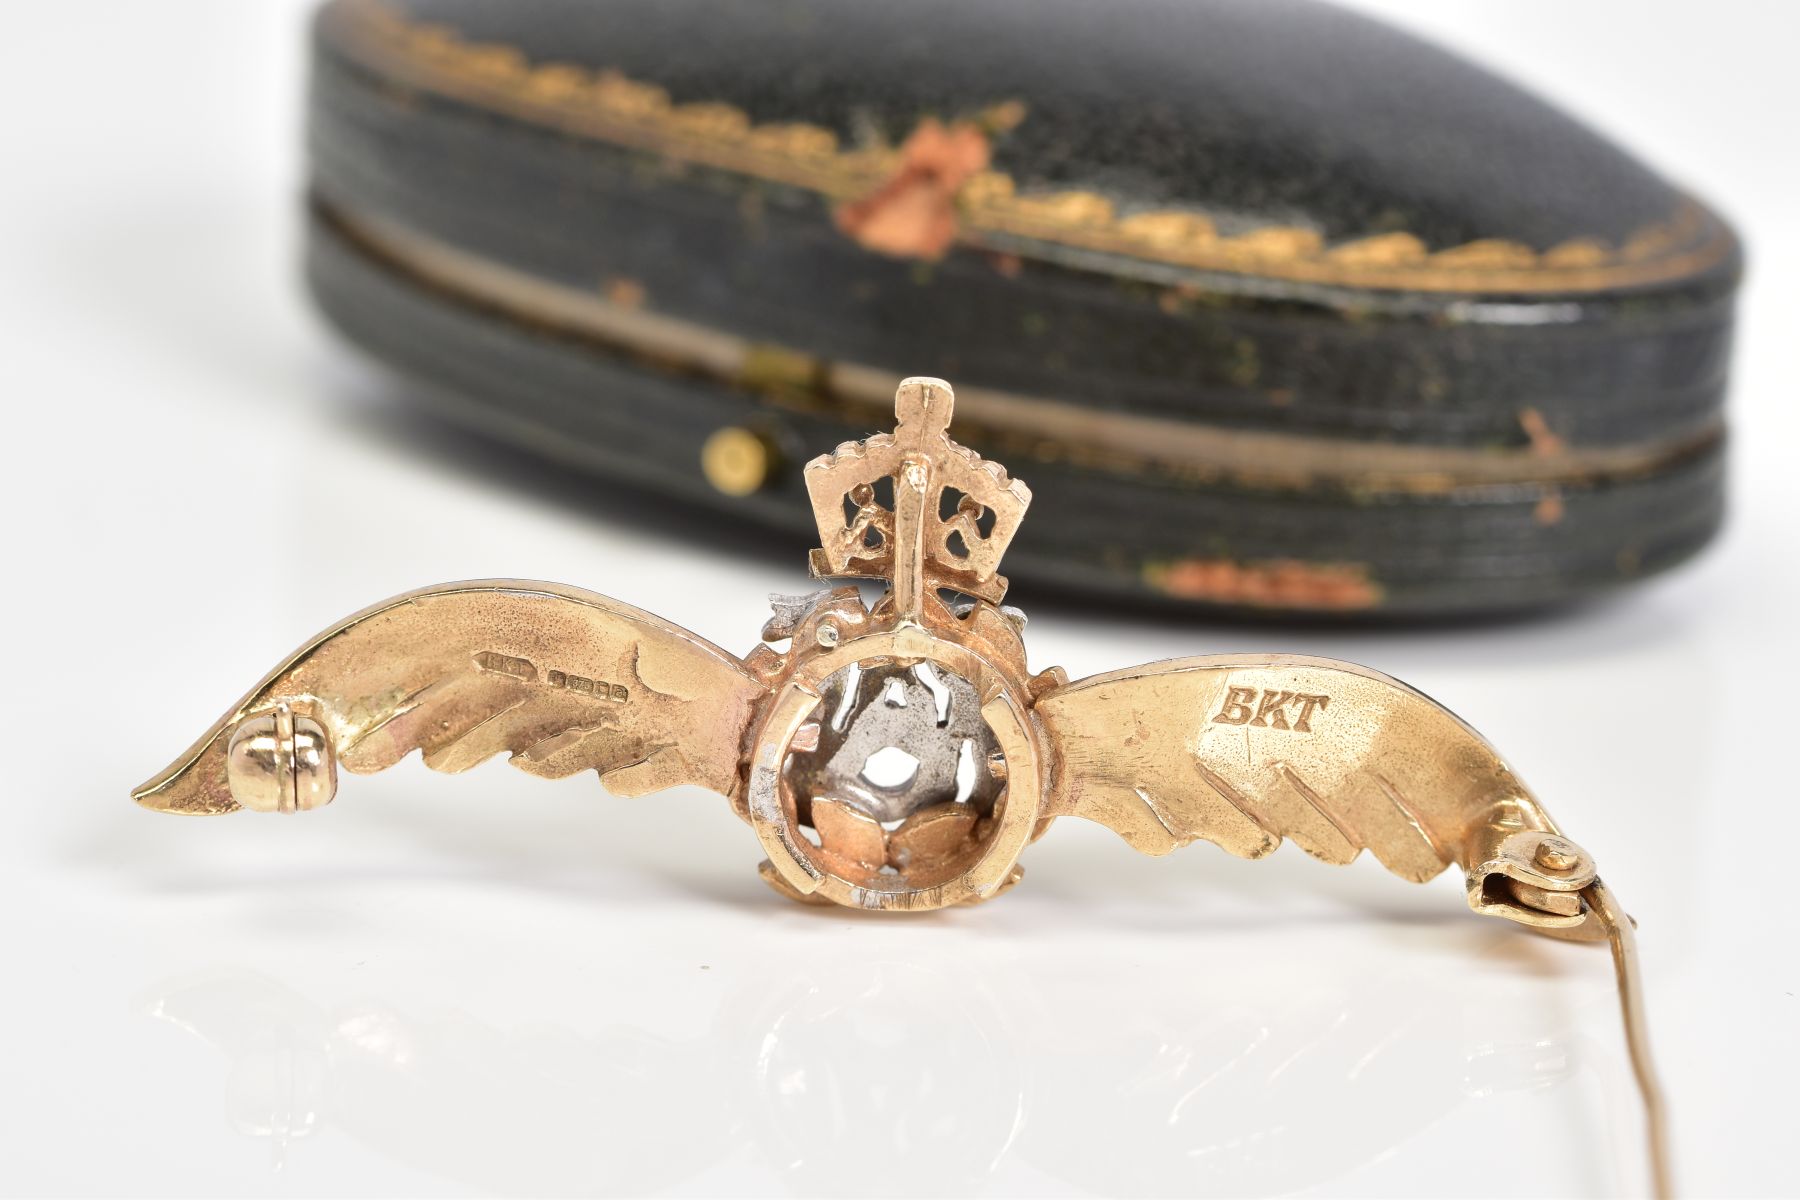 A 1956 9CT GOLD RAF BROOCH, with a 9ct hallmark for London 1956, length 54mm, approximate weight 6.3 - Image 3 of 3